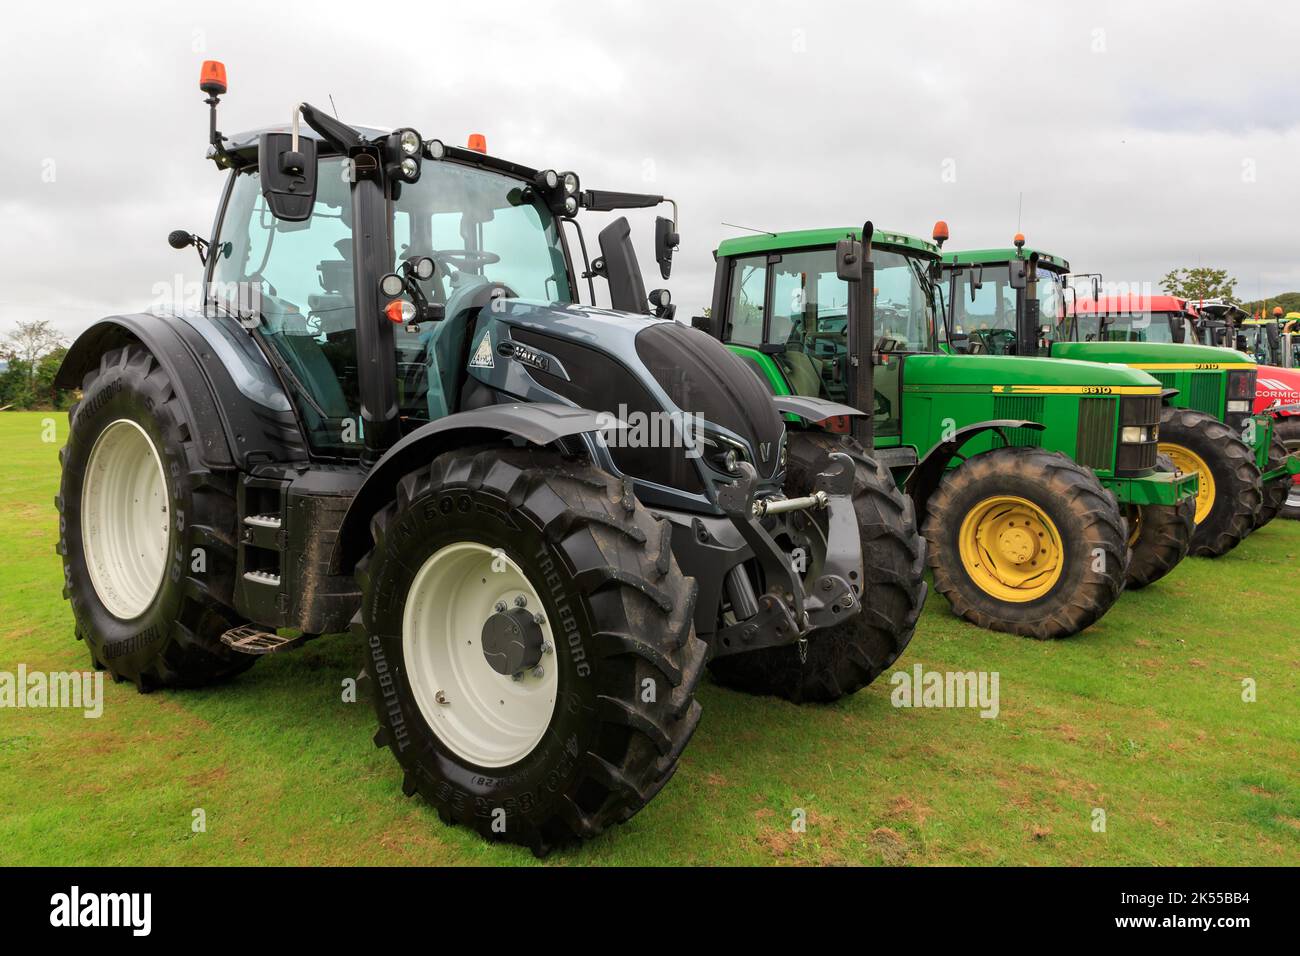 Brydkirk, Scotland - September 04, 2022: Side view of a Valtra N154 with two John Deere tractors in the background Stock Photo